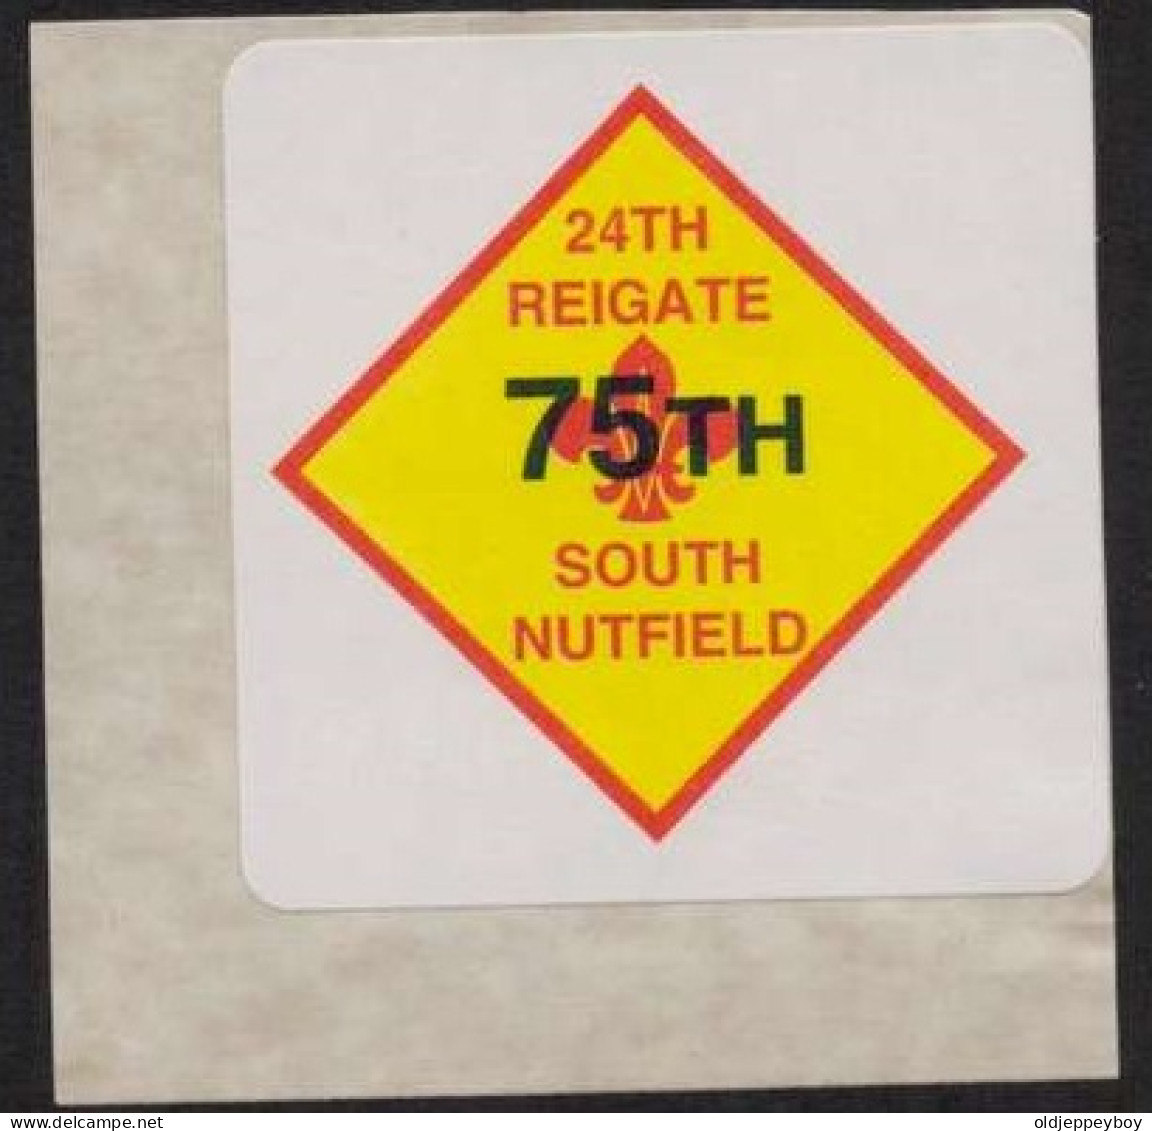 MNH**  75 Th South Nutfield 24TH REIGATE VIGNETTE SCOUTS POSTER STAMP  Pfadfinder CINDERELLA SCOUTING SCOUTISMO - Ongebruikt